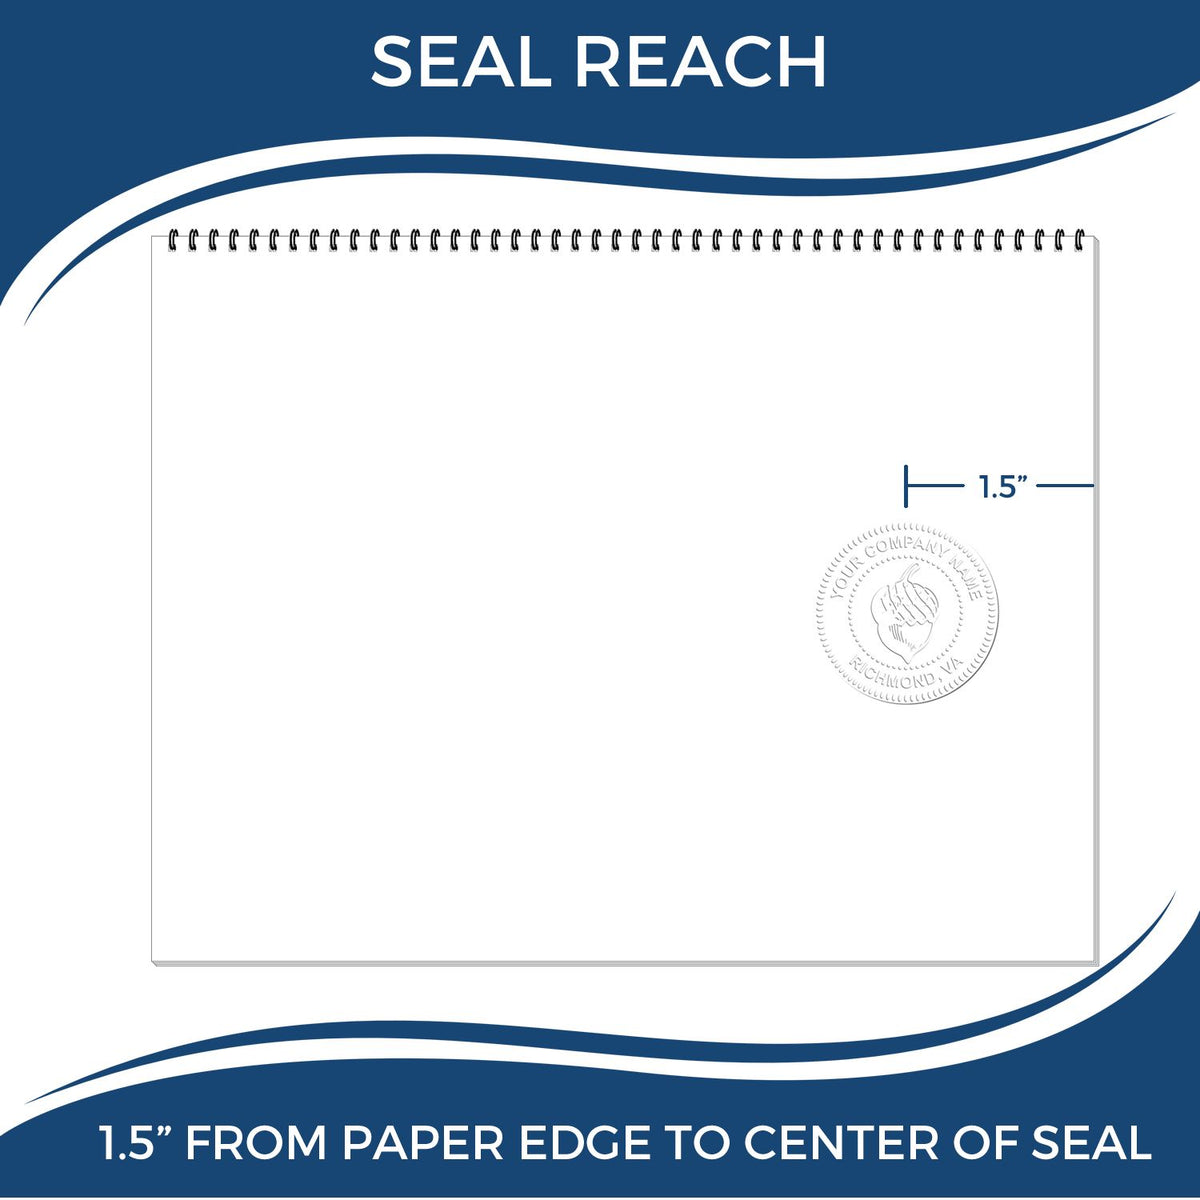 An infographic showing the seal reach which is represented by a ruler and a miniature seal image of the Handheld Kansas Architect Seal Embosser